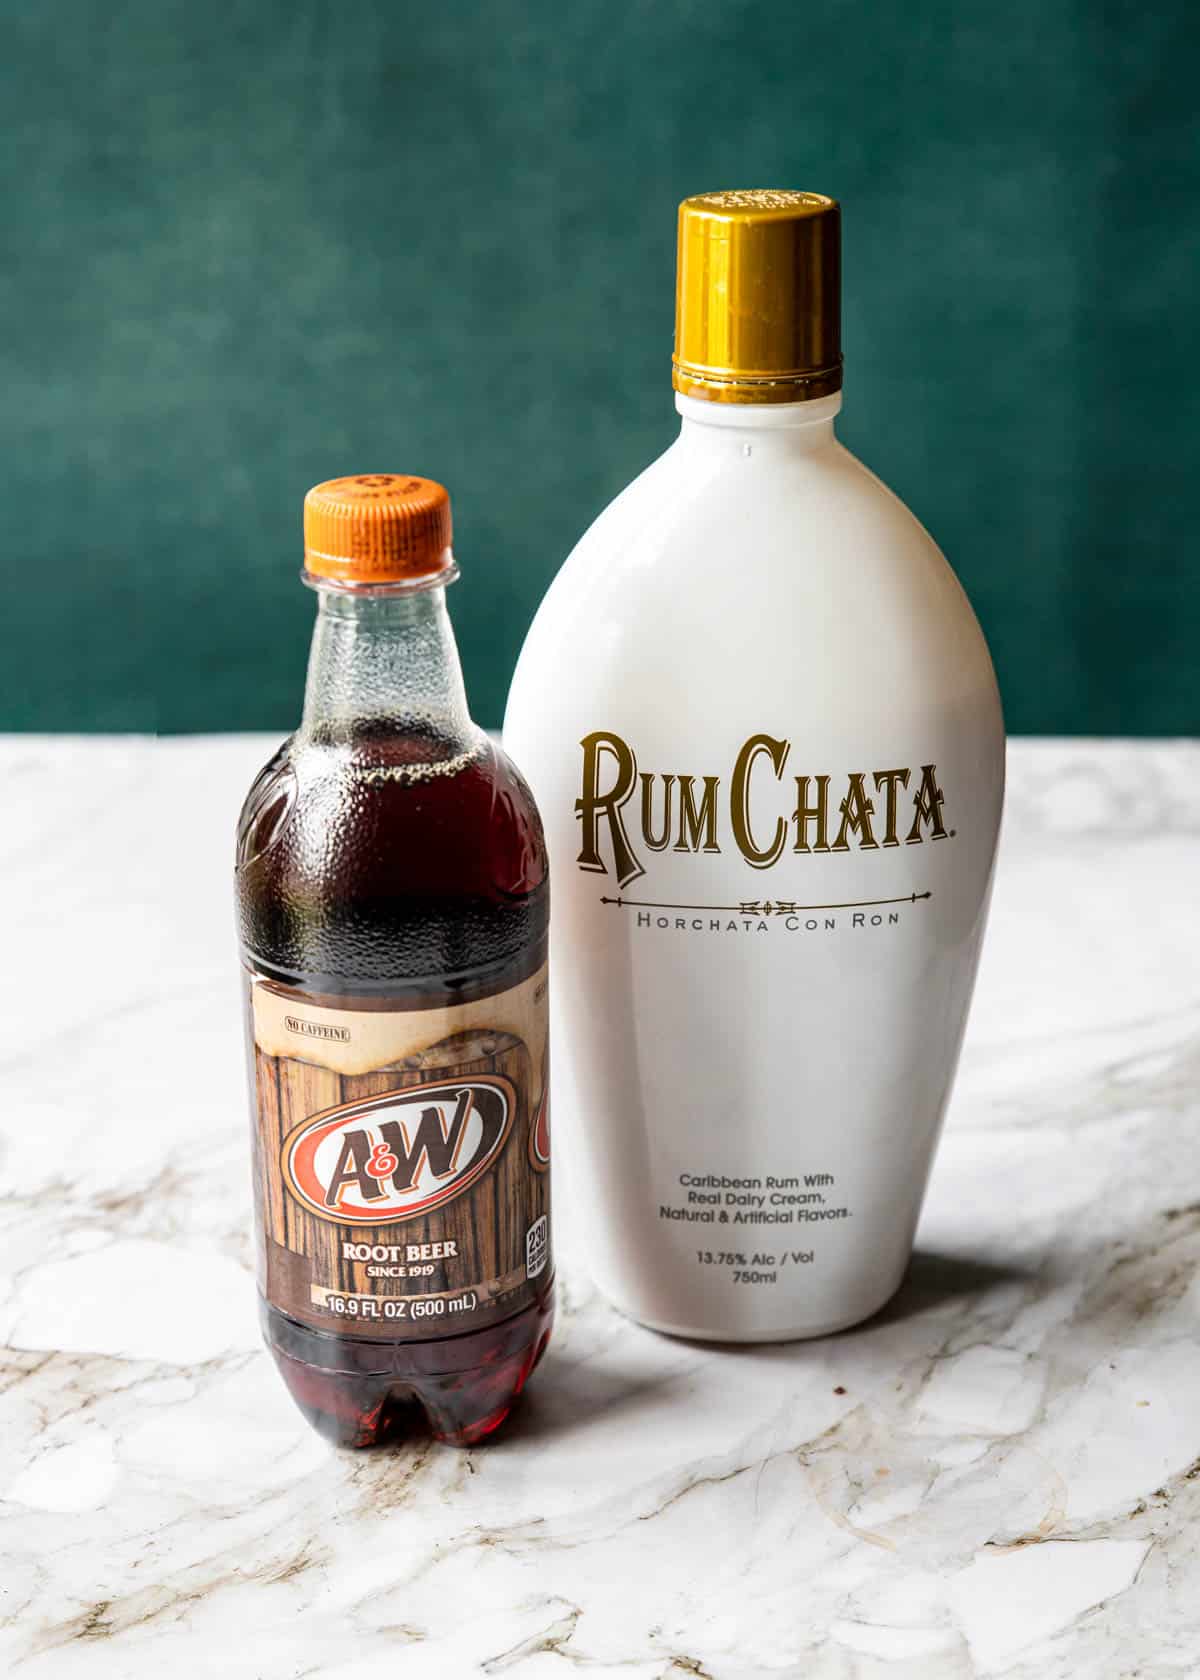 a bottle of rumchata and A&W root beer